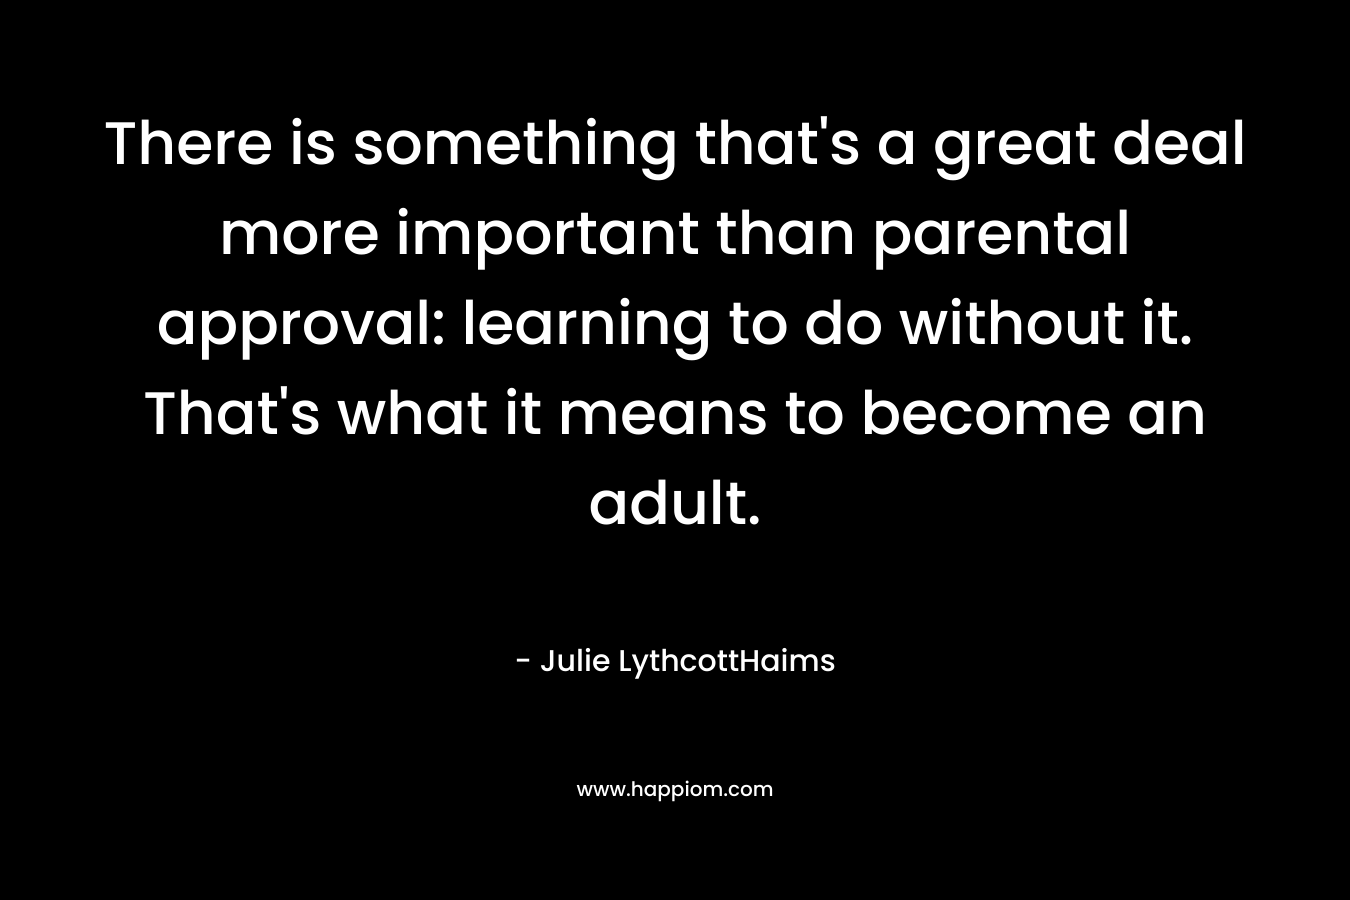 There is something that's a great deal more important than parental approval: learning to do without it. That's what it means to become an adult.